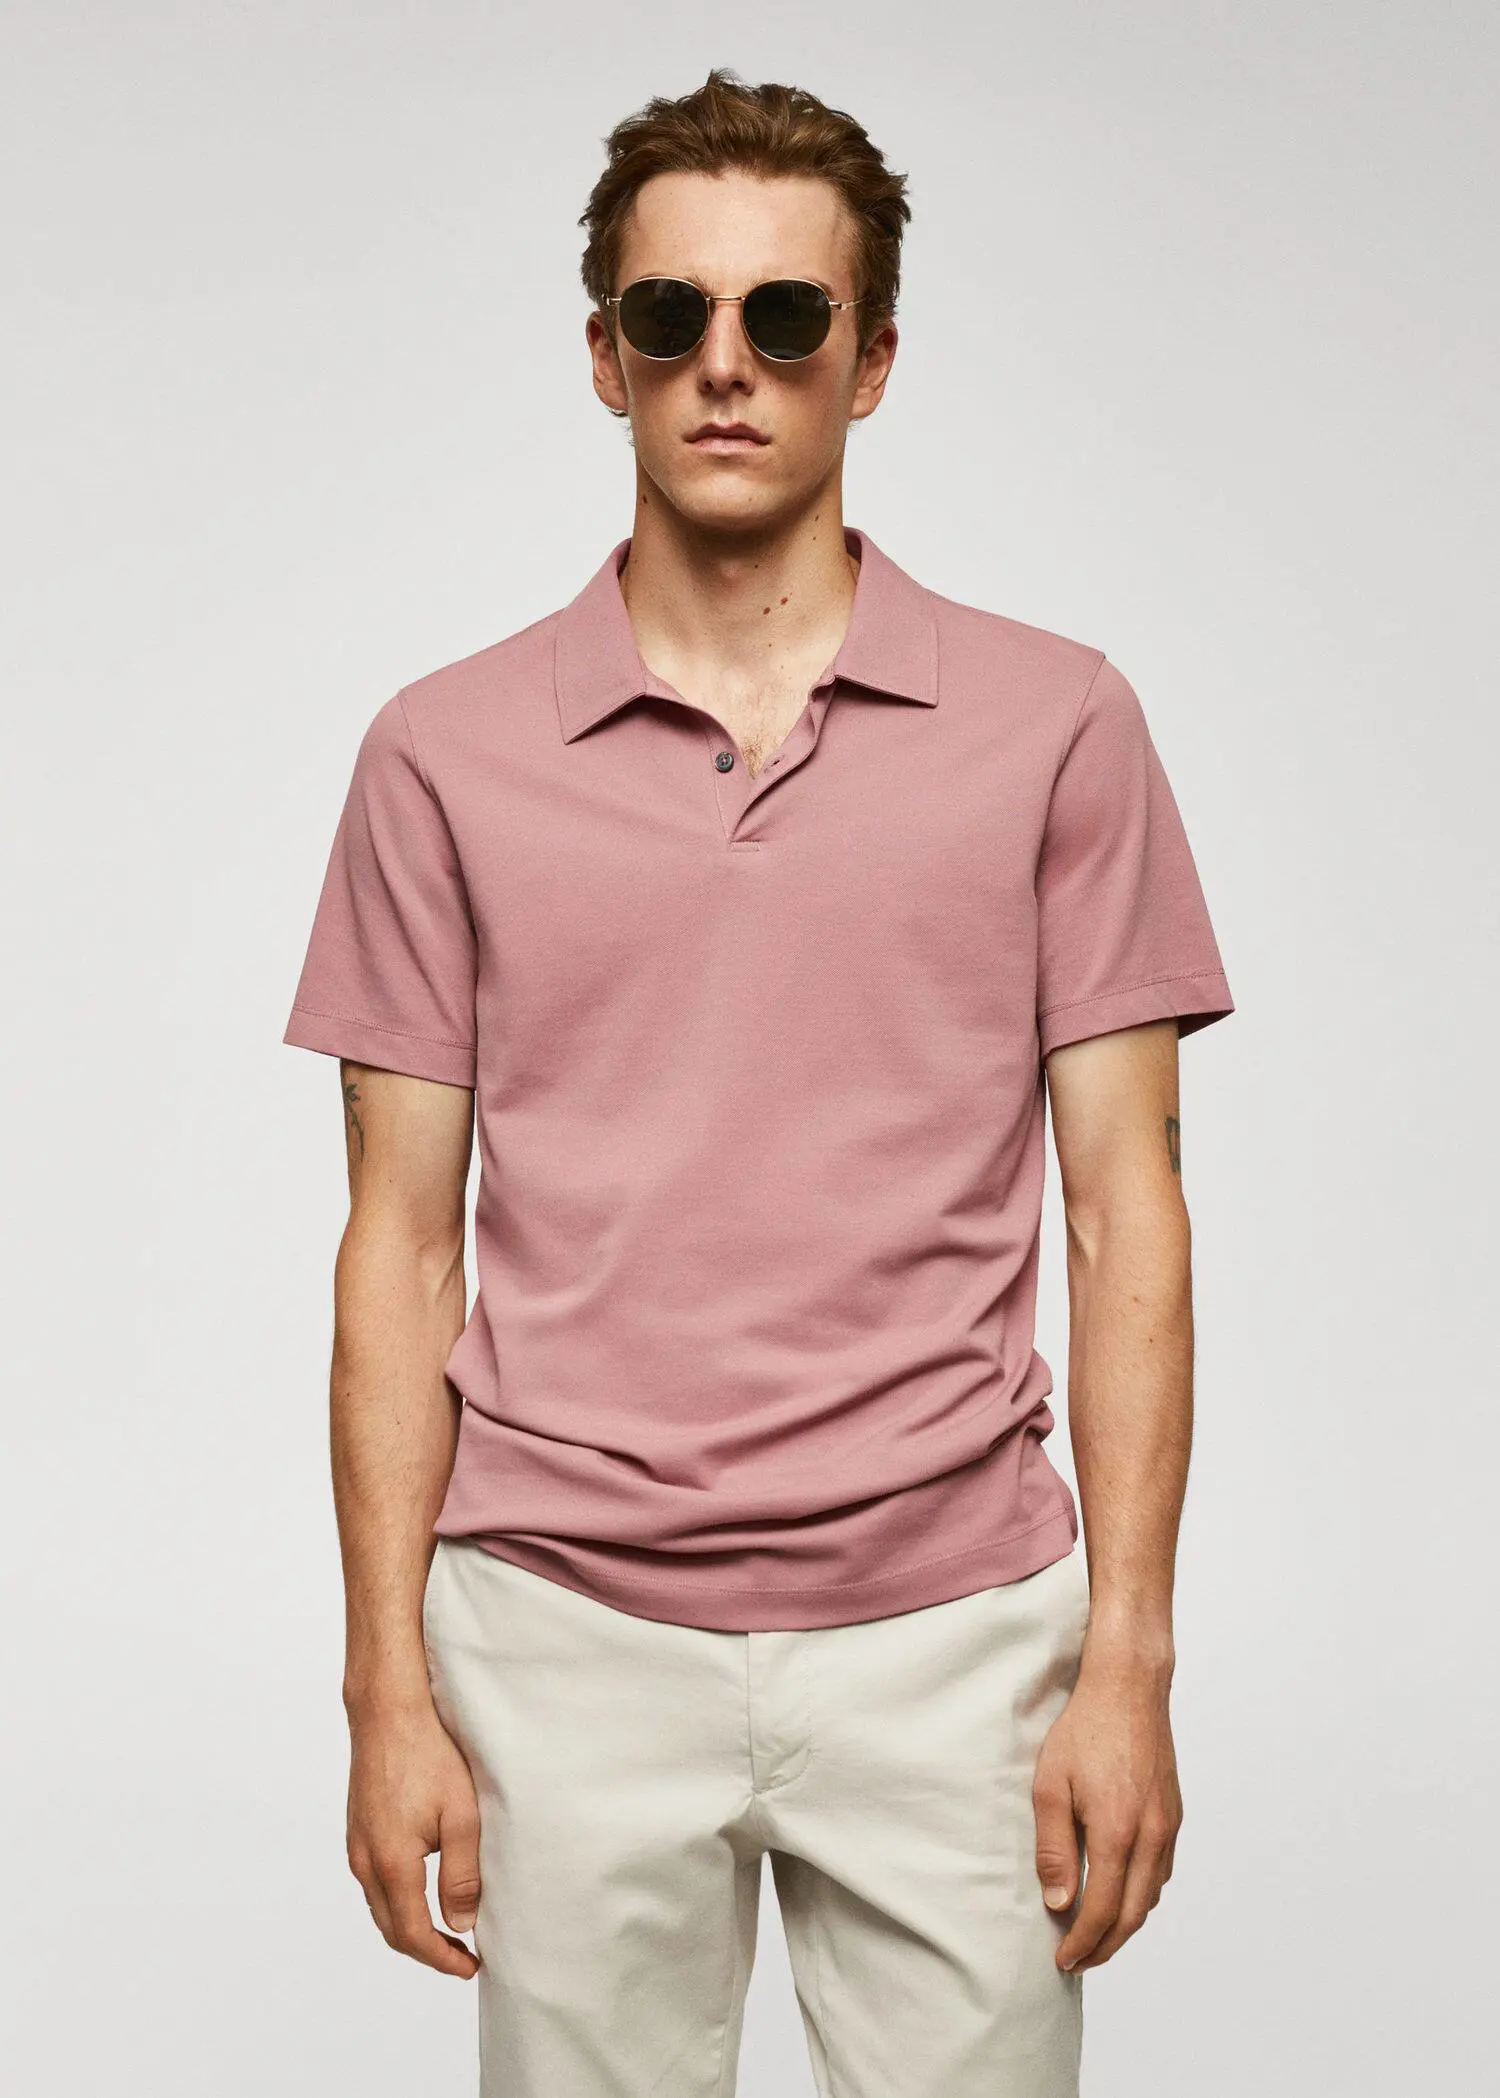 Mango Slim-fit textured cotton polo shirt. a man in a pink polo shirt and white pants. 